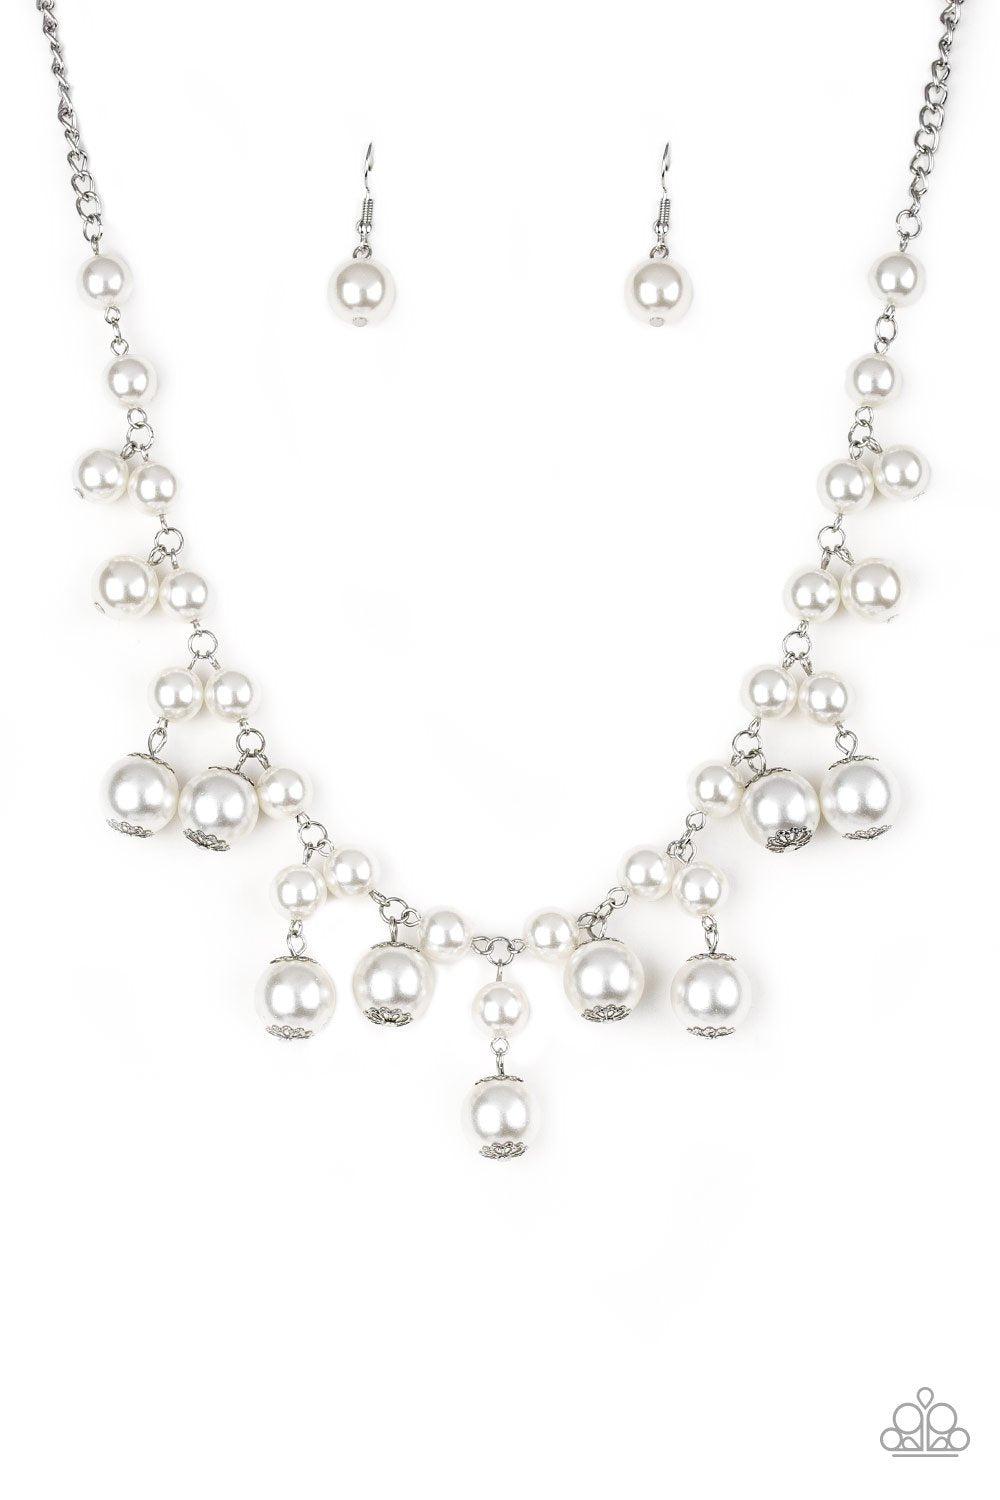 Soon To Be Mrs. White Pearl Necklace - Paparazzi Accessories - lightbox -CarasShop.com - $5 Jewelry by Cara Jewels